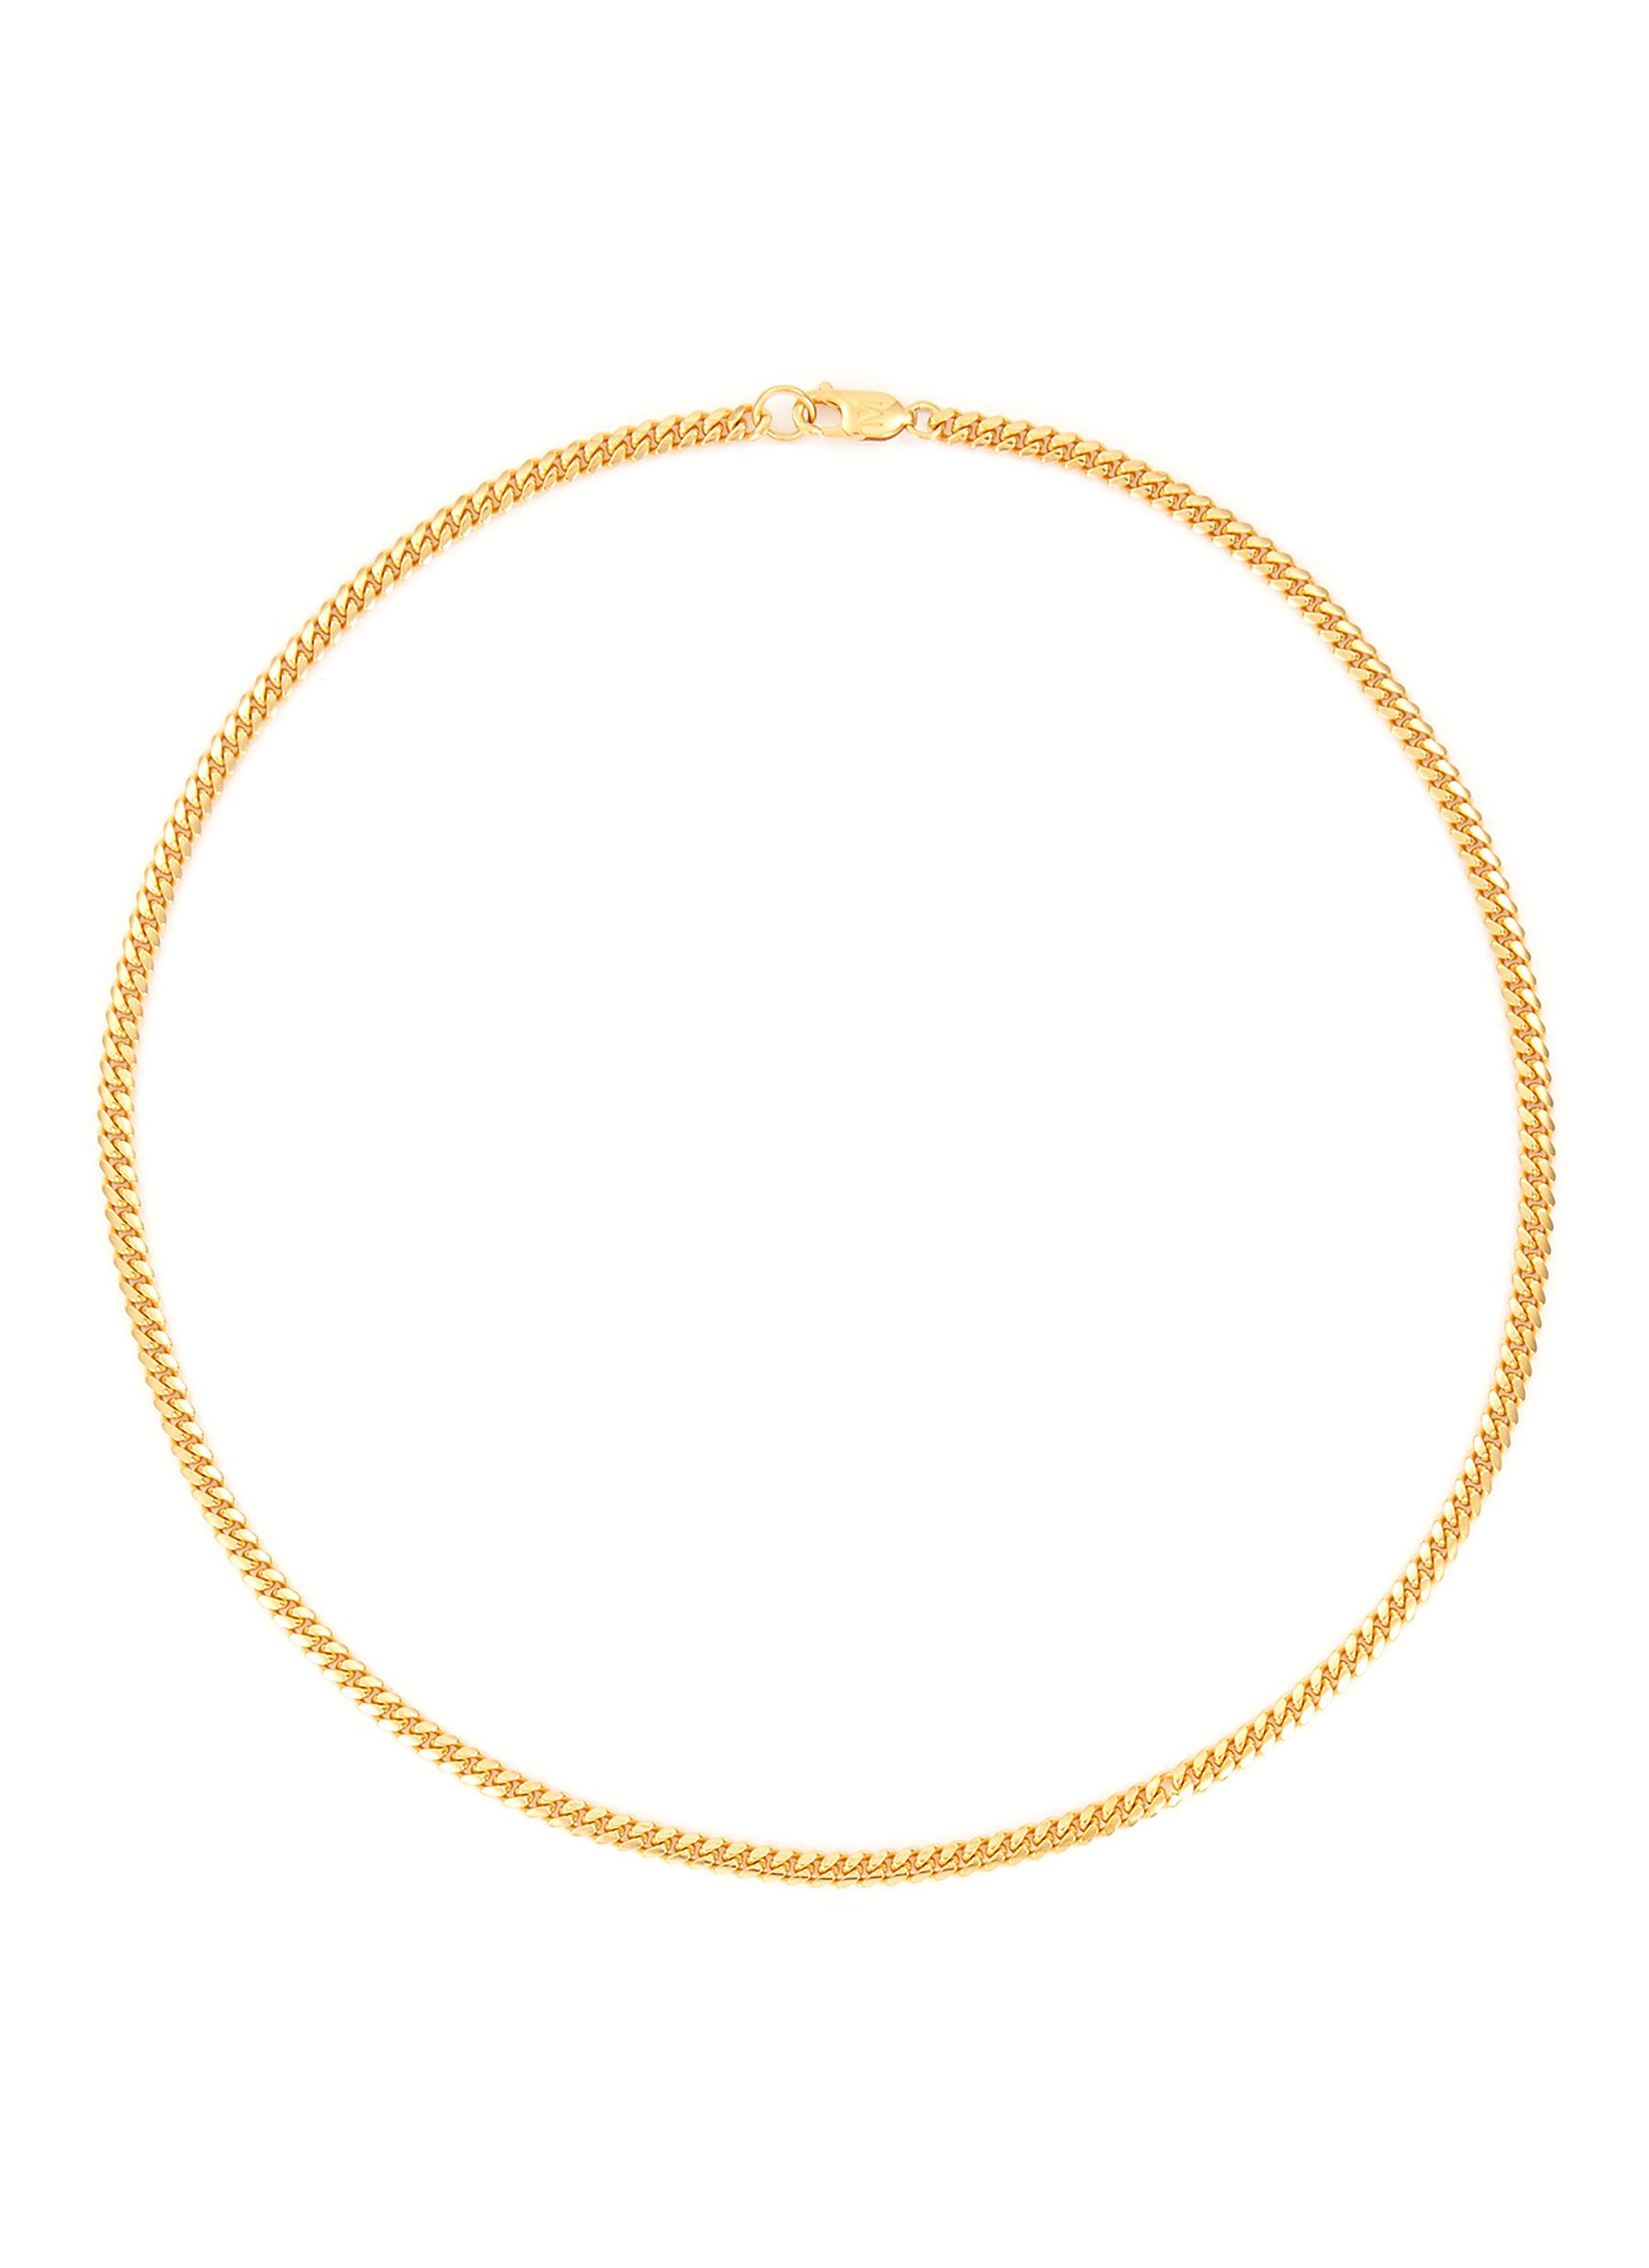 MISSOMA GOLD-TONED METAL ROUND CURB NECKLACE